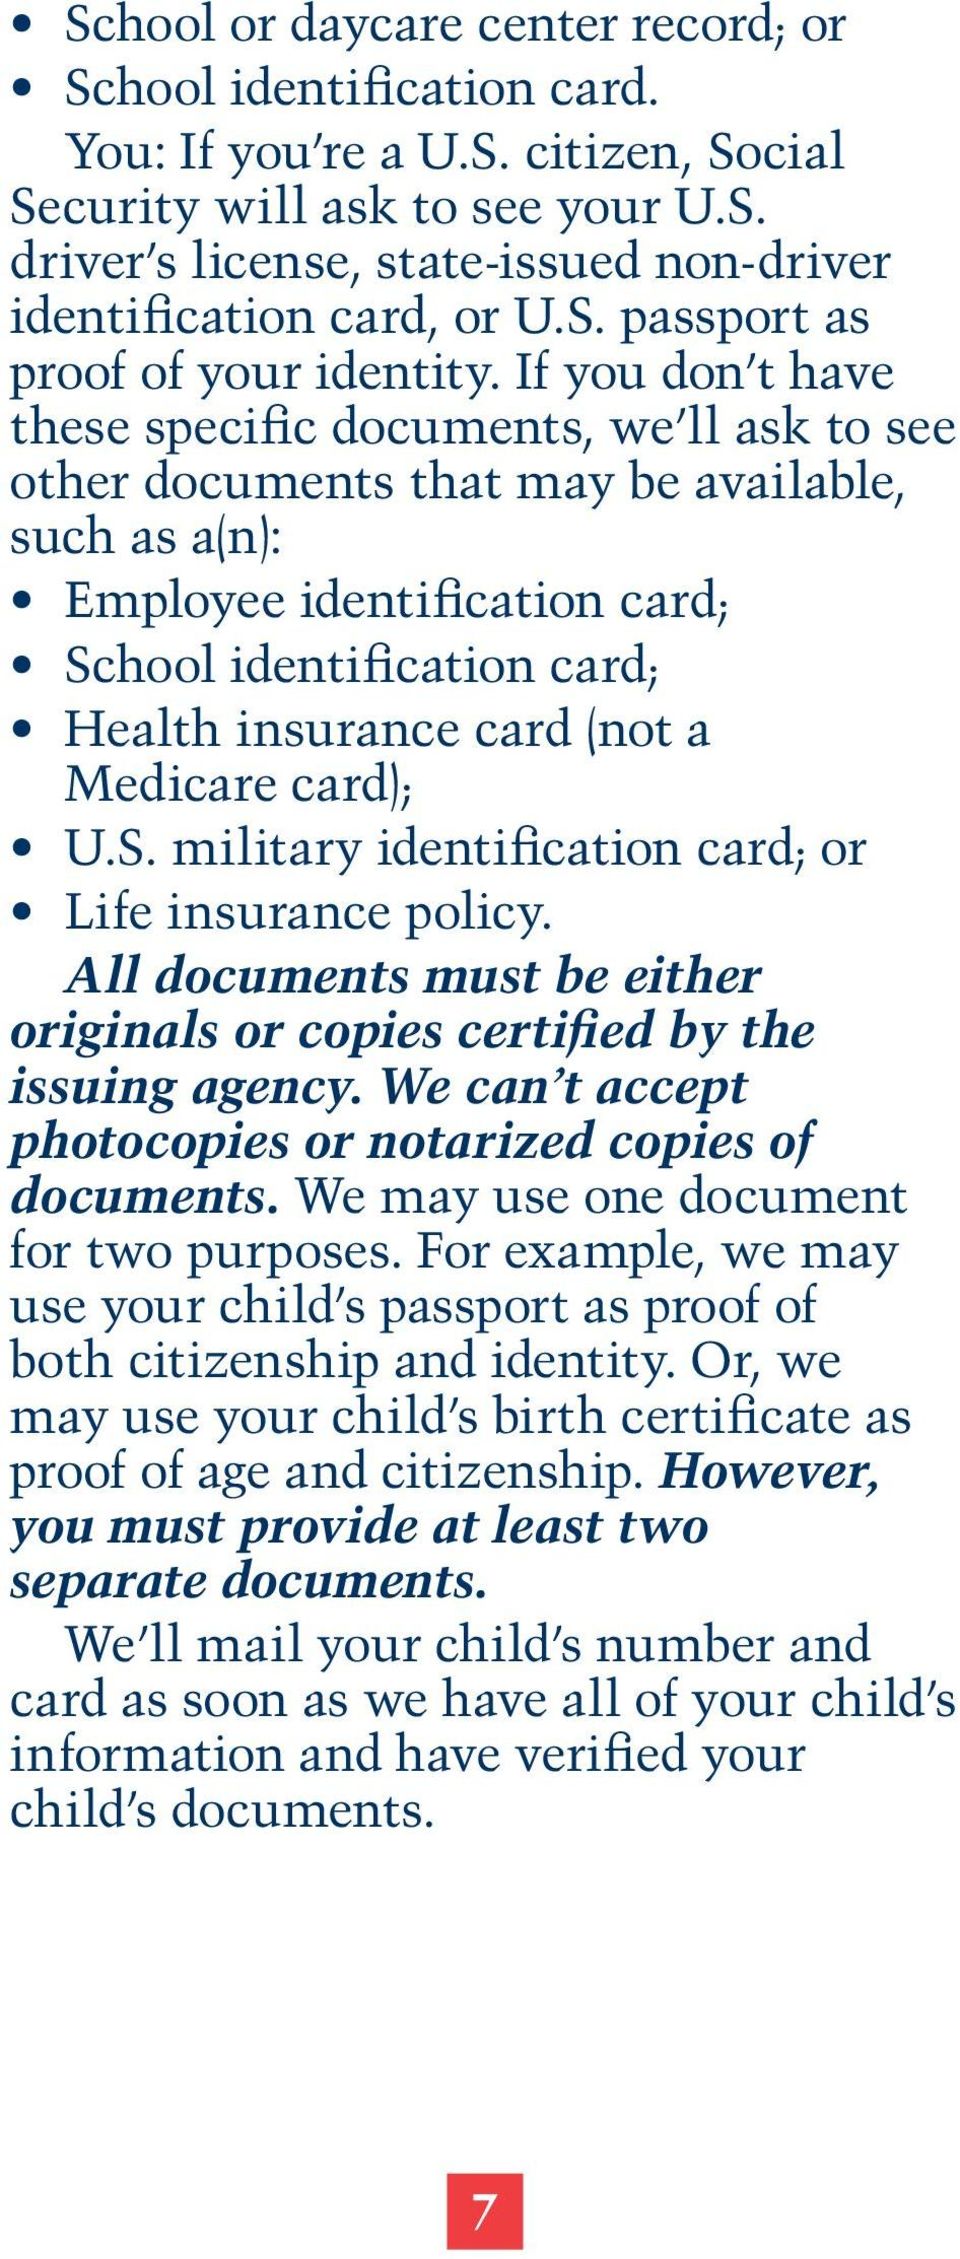 If you don t have these specific documents, we ll ask to see other documents that may be available, such as a(n): Employee identification card; School identification card; Health insurance card (not